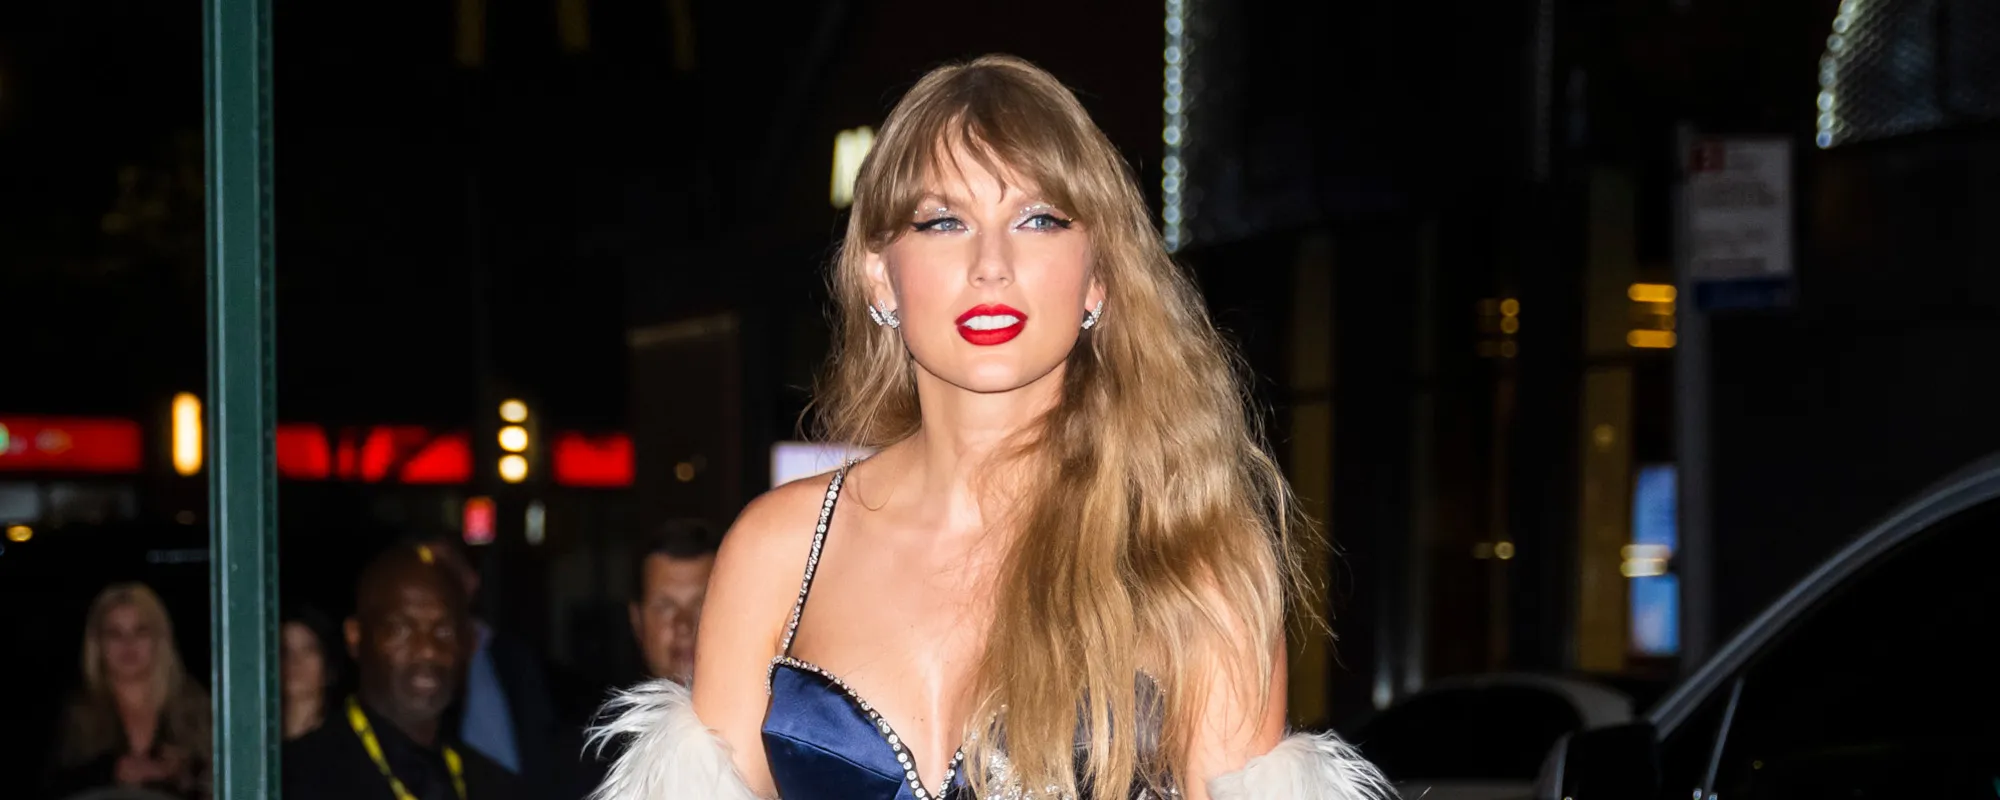 Taylor Swift Addresses the Red Scarf at Toronto International Film Festival—“I’m Just Going to Stop”